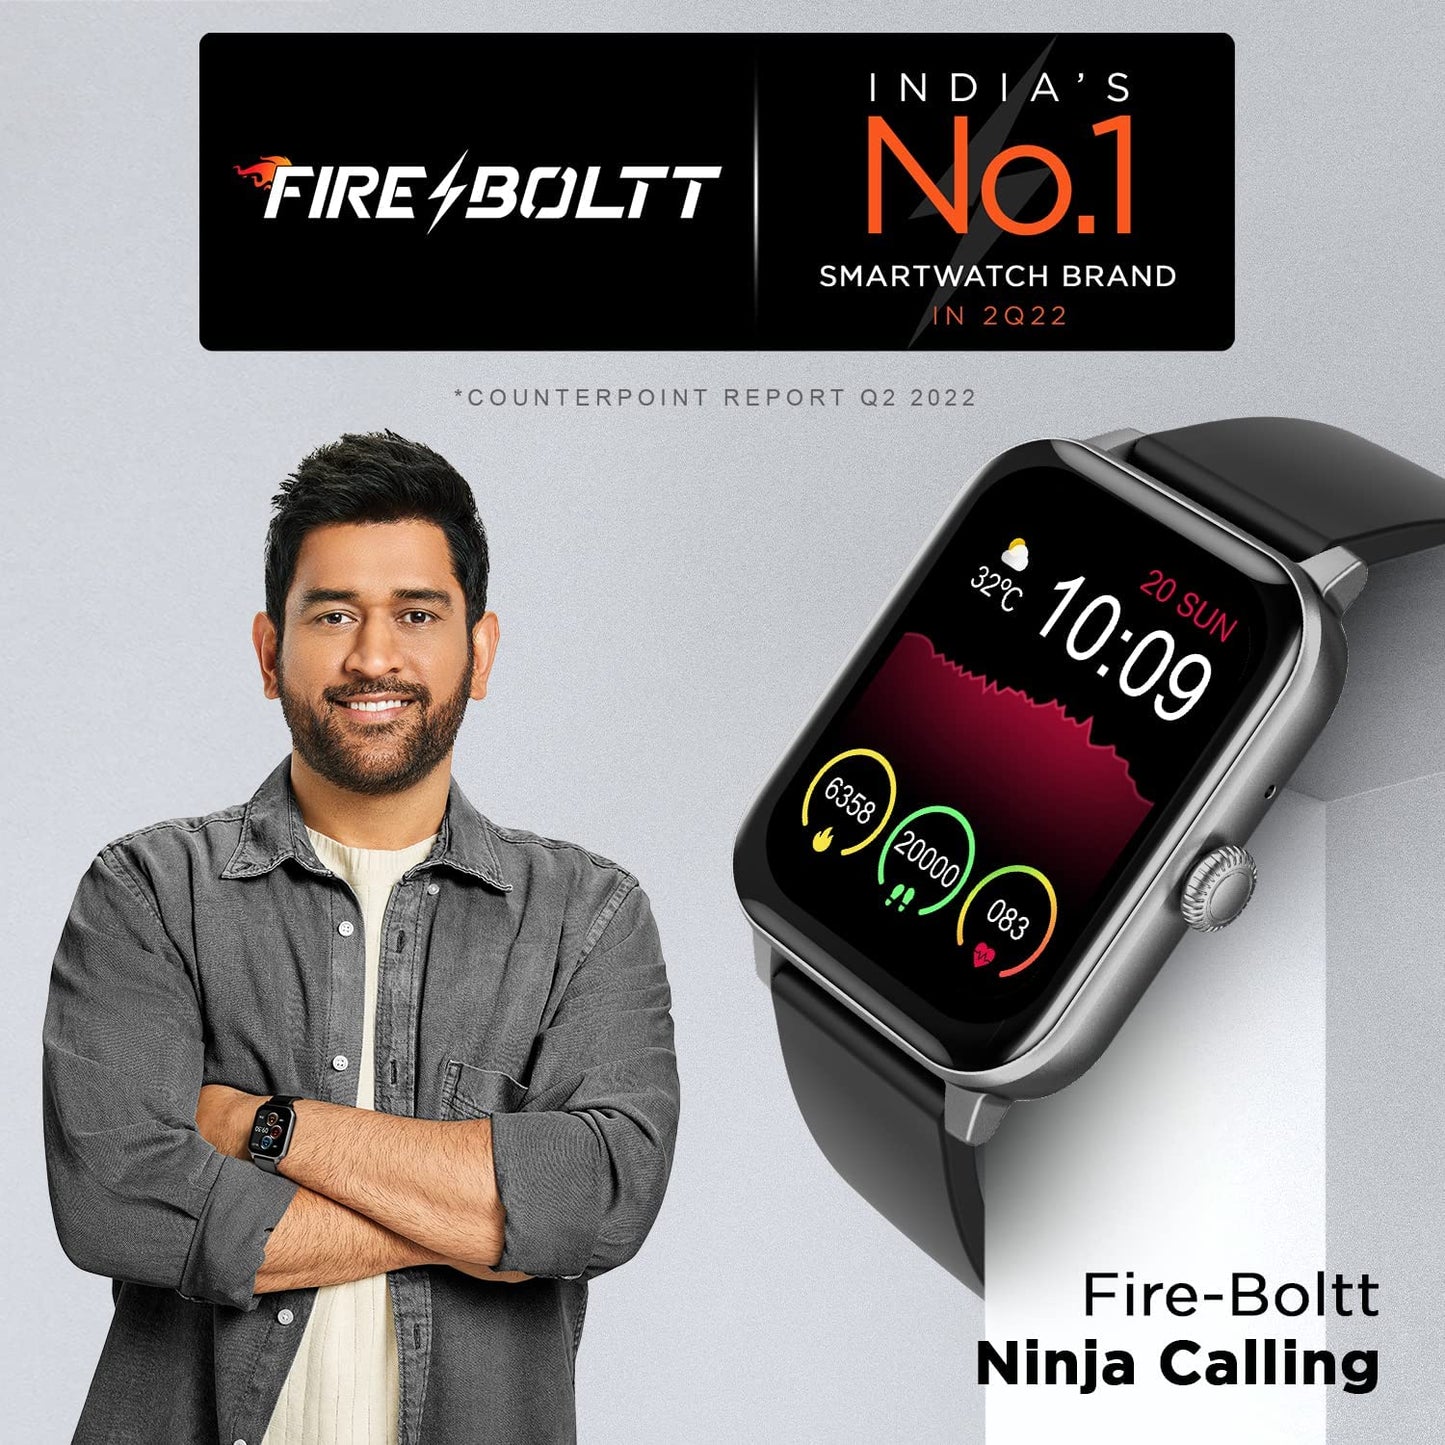 (Refurbished) Fire-Boltt Ninja Calling 1.69" Full Touch Bluetooth Calling Smartwatch with 30 Sports Mode, SpO2, Heart Rate Monitoring & AI Voice Assistant (Metal Grey)